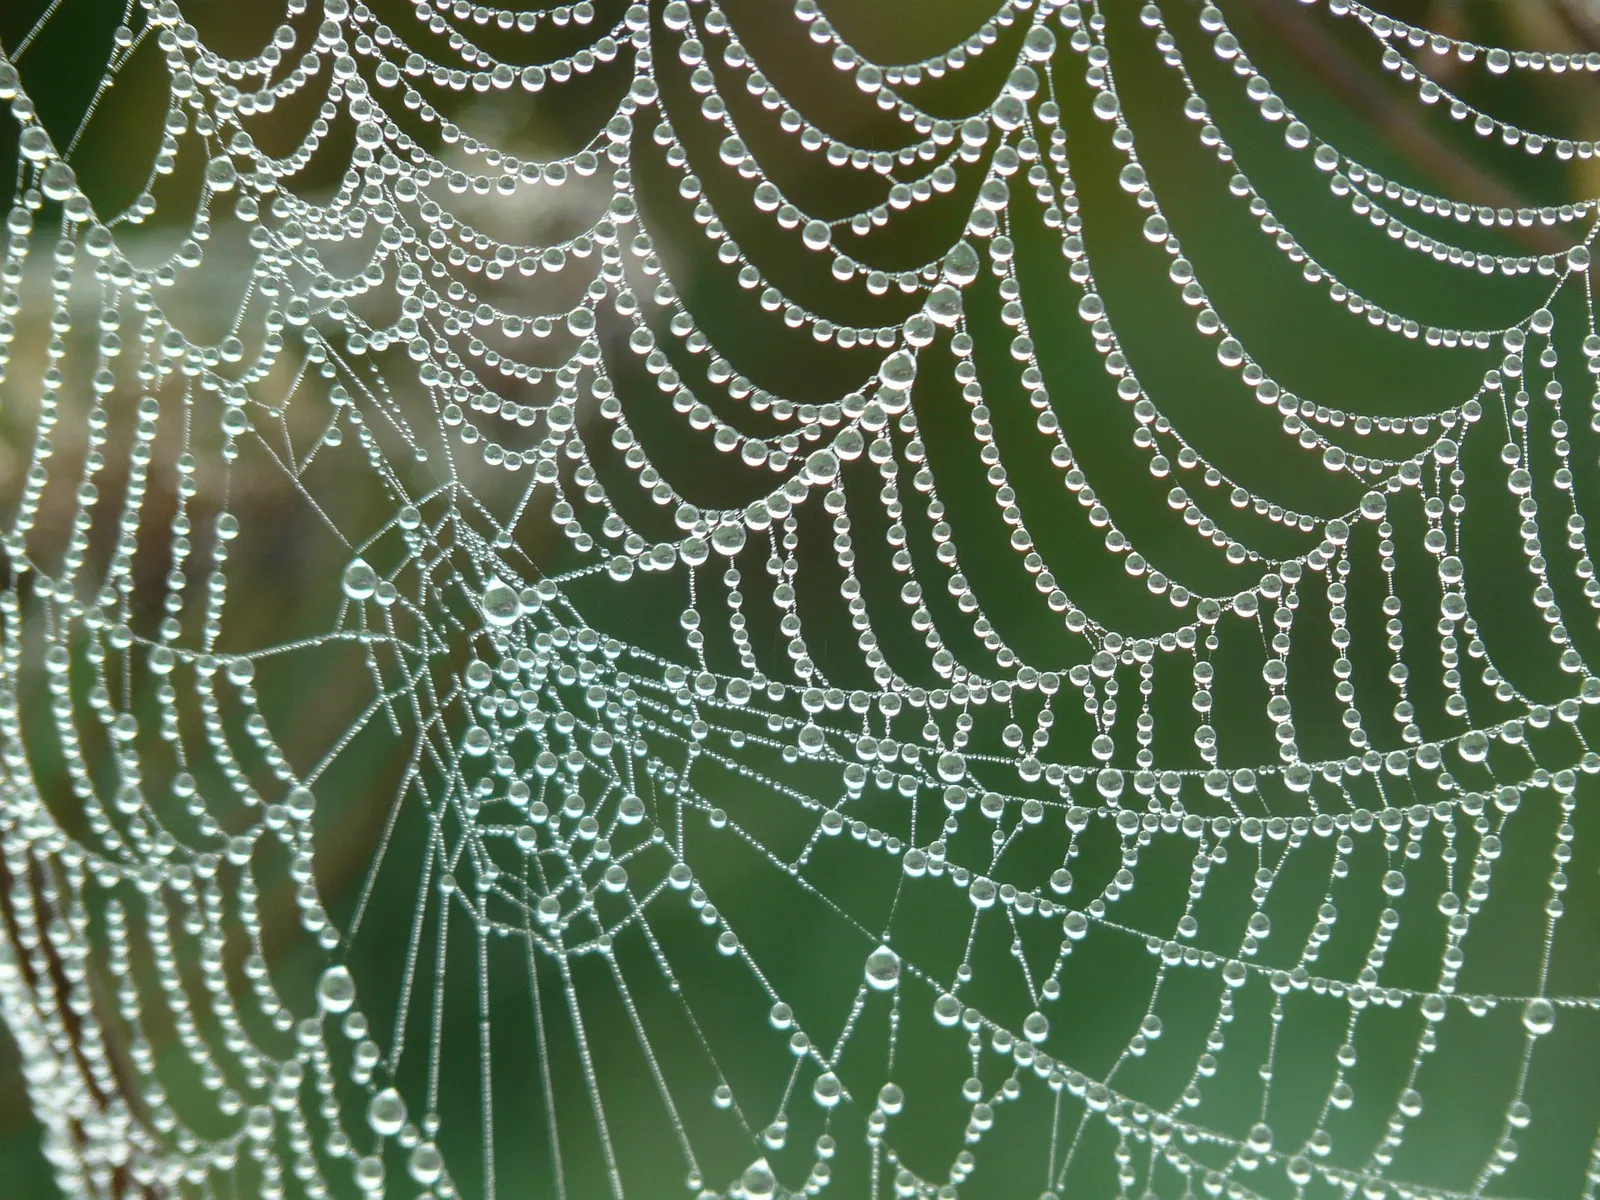 New Artificial Spider Silk: Stronger Than Steel and 98 Percent